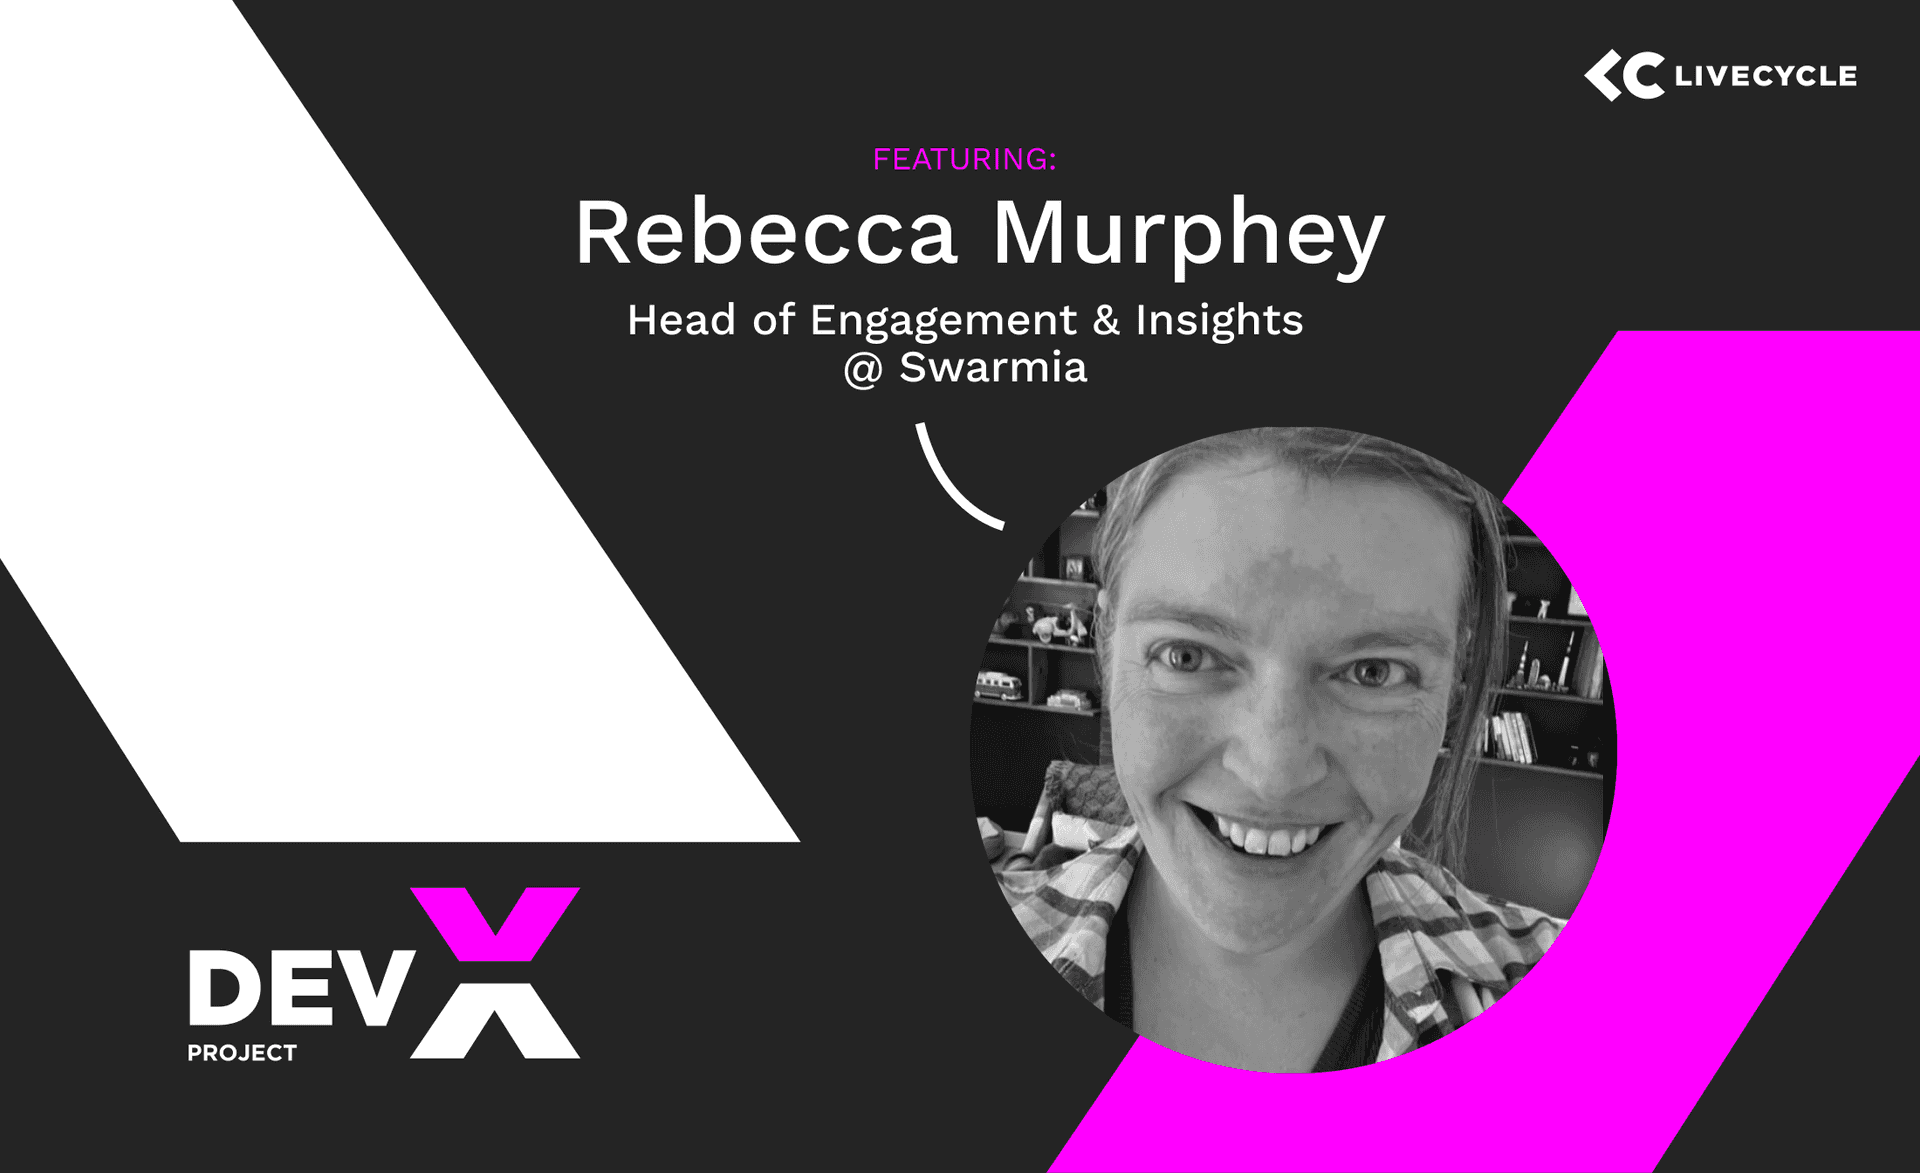 The Dev-X Project: Featuring Rebecca Murphey